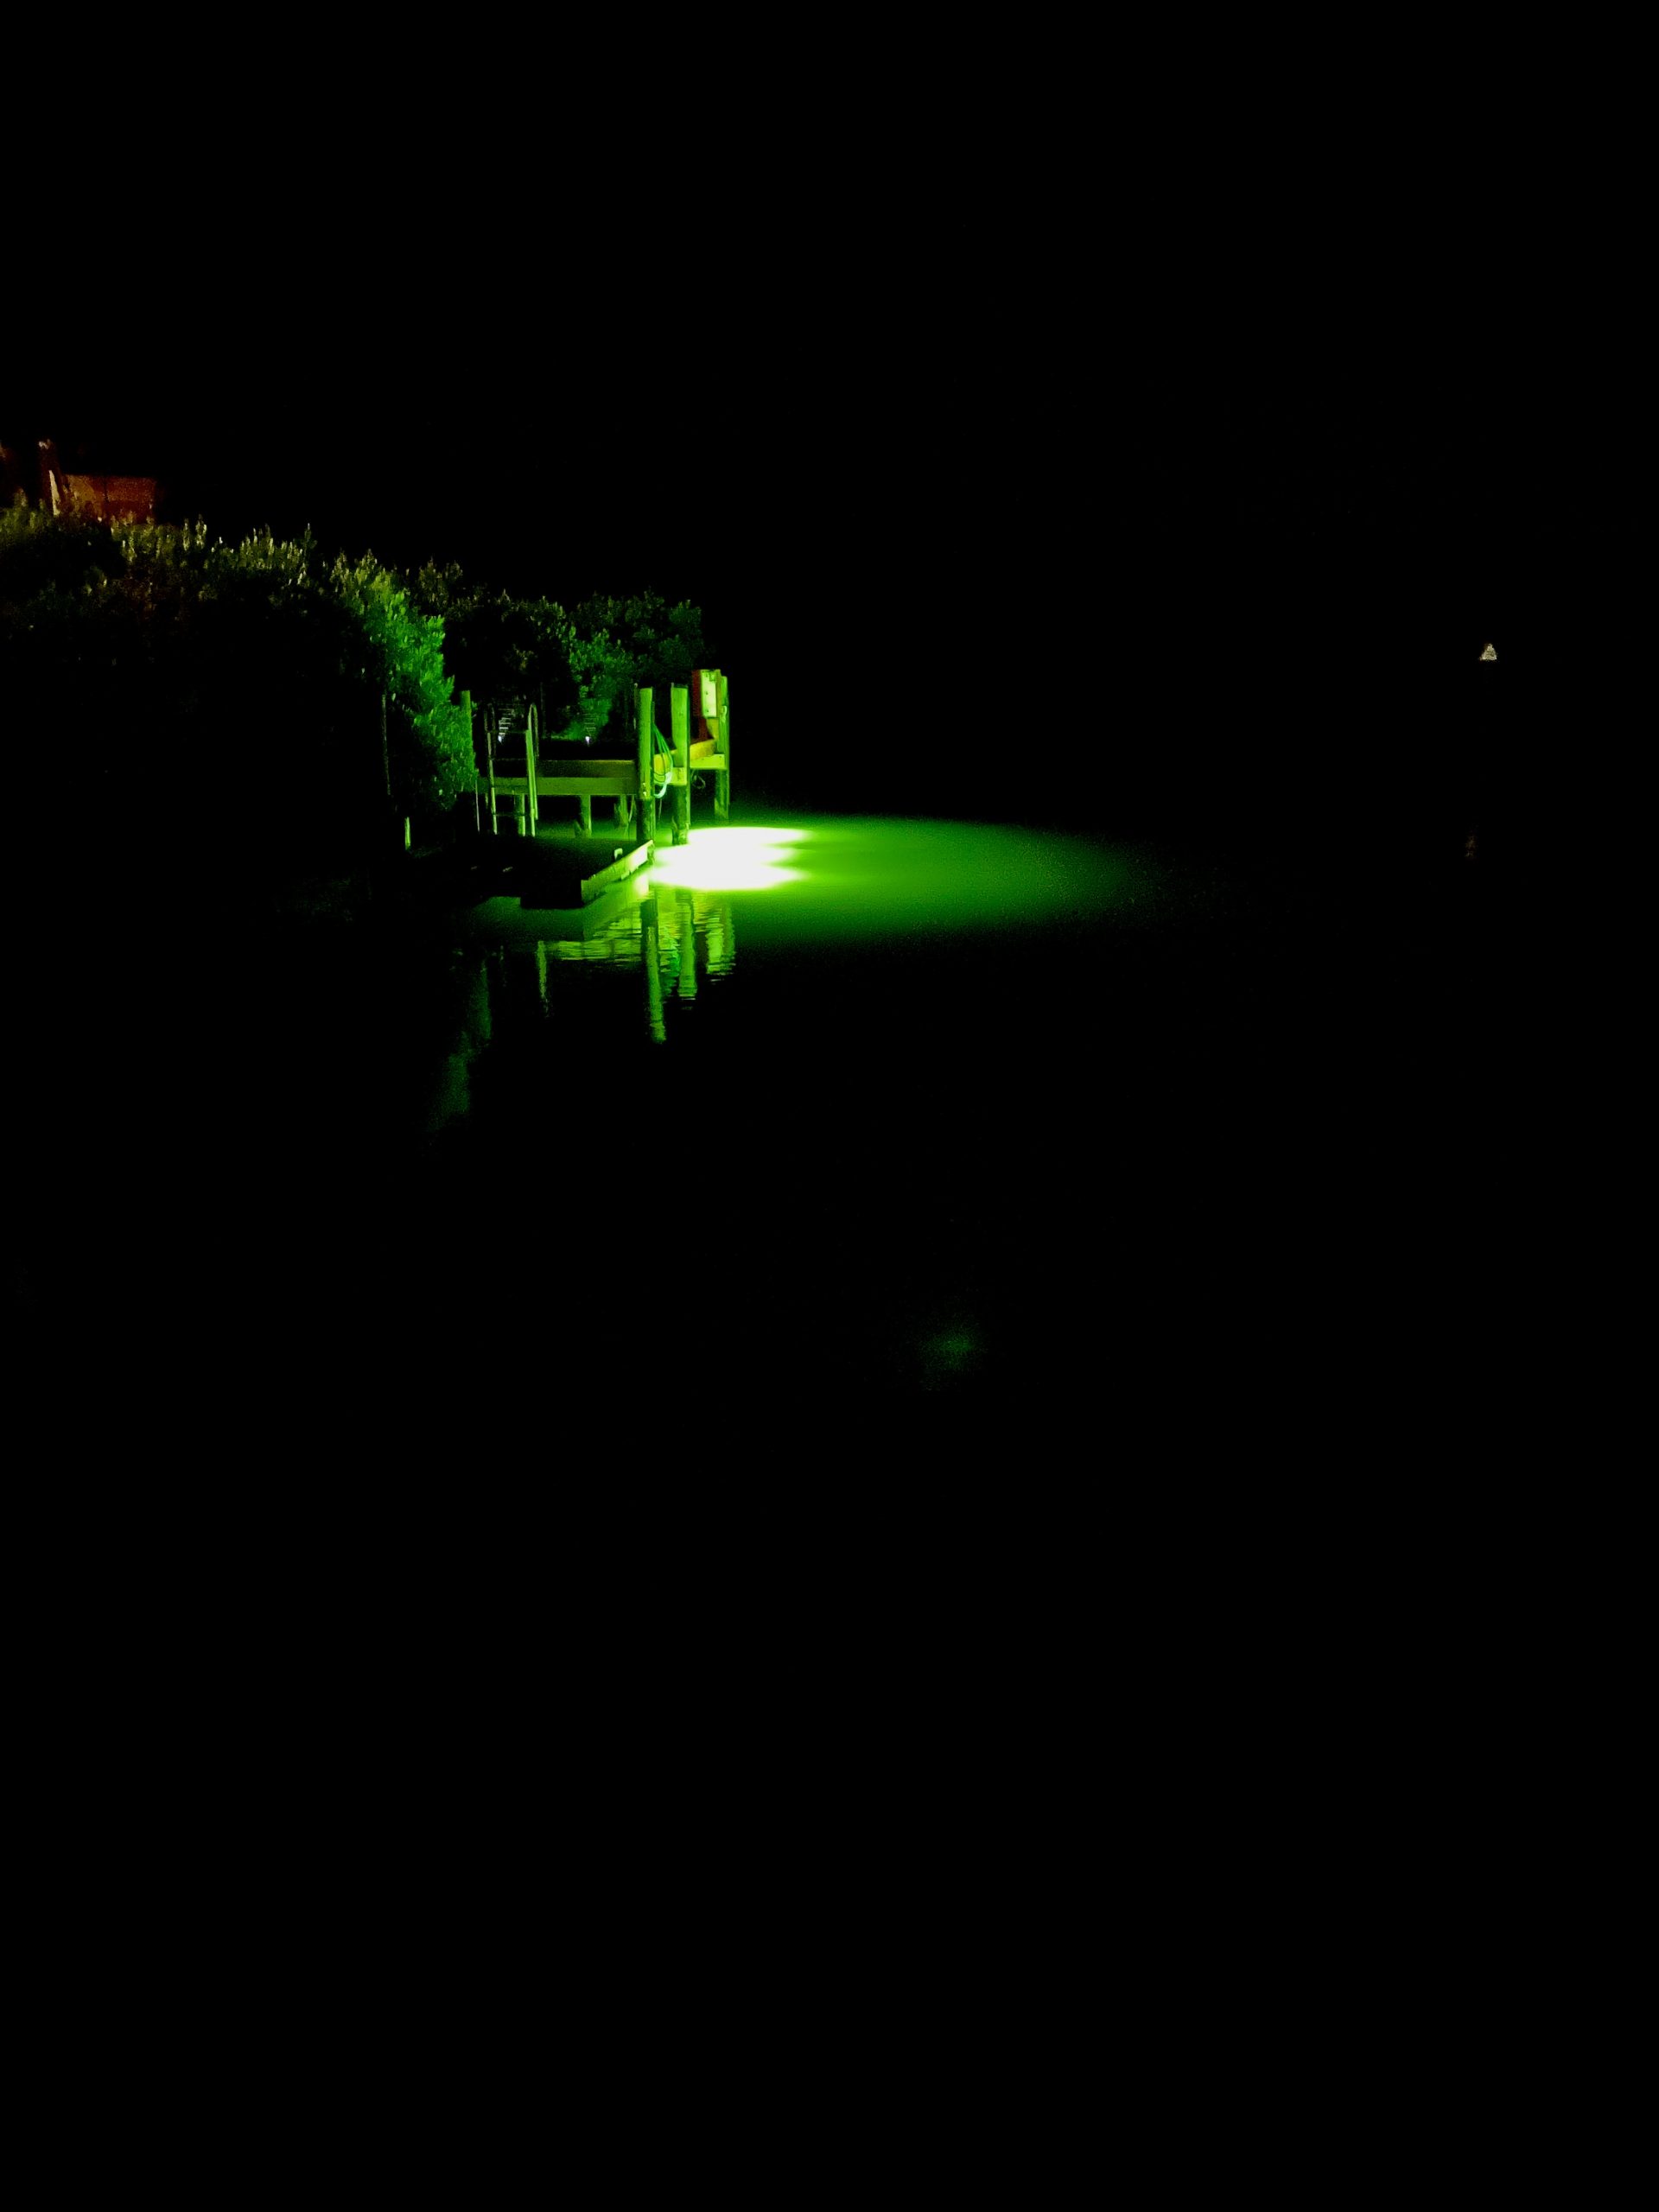 A picture of a dock light glowing in the darkness